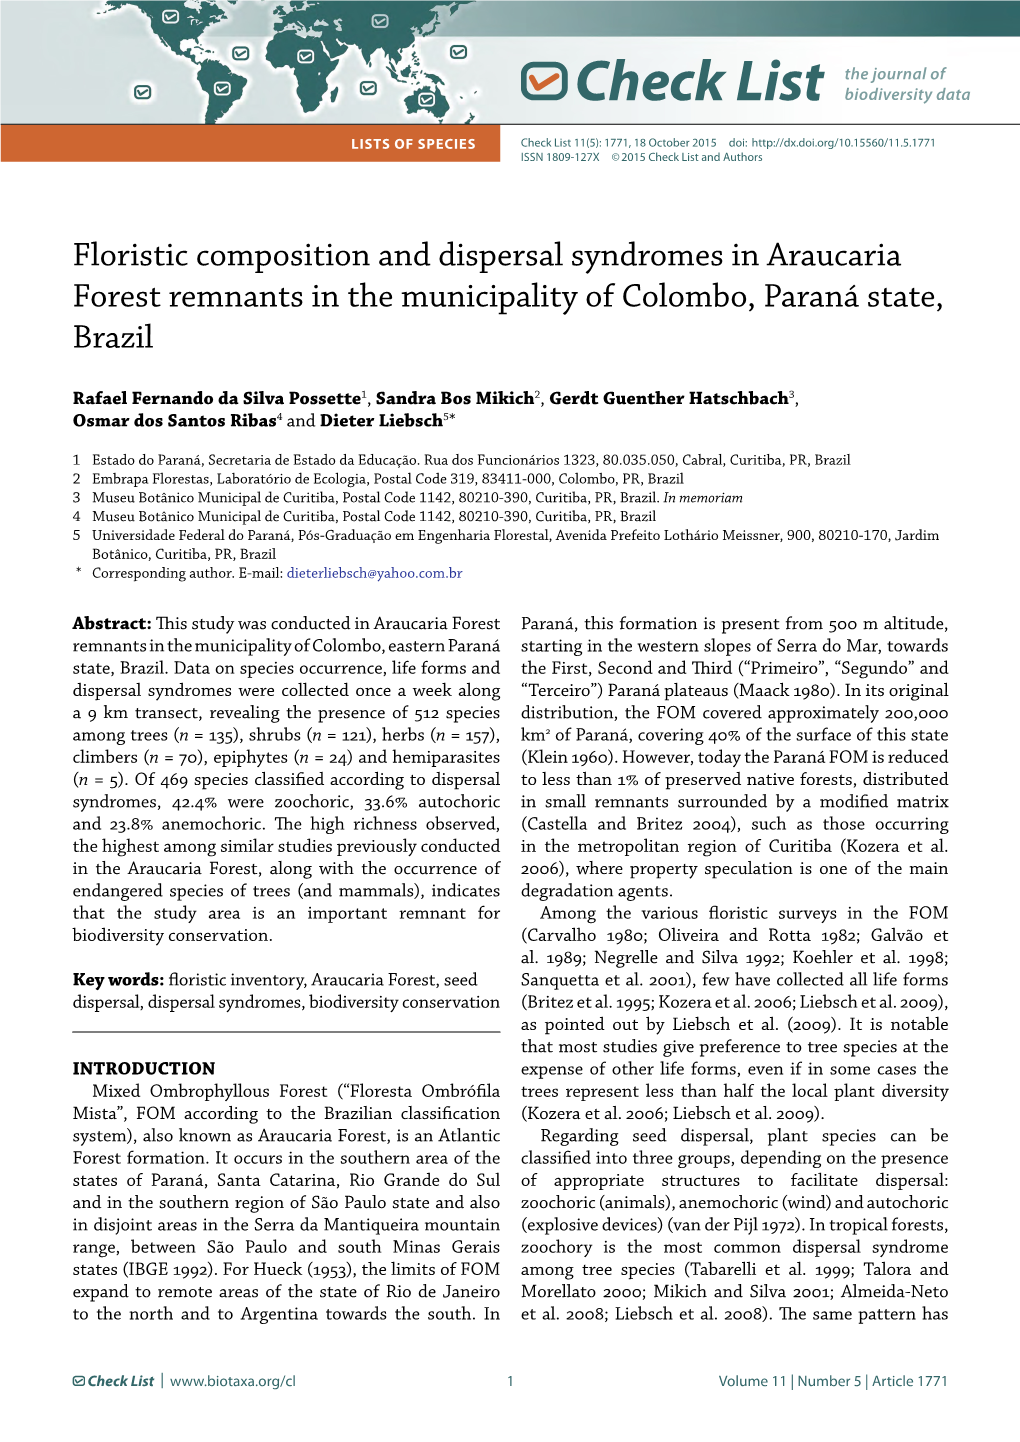 Floristic Composition and Dispersal Syndromes in Araucaria Forest Remnants in the Municipality of Colombo, Paraná State, Brazil